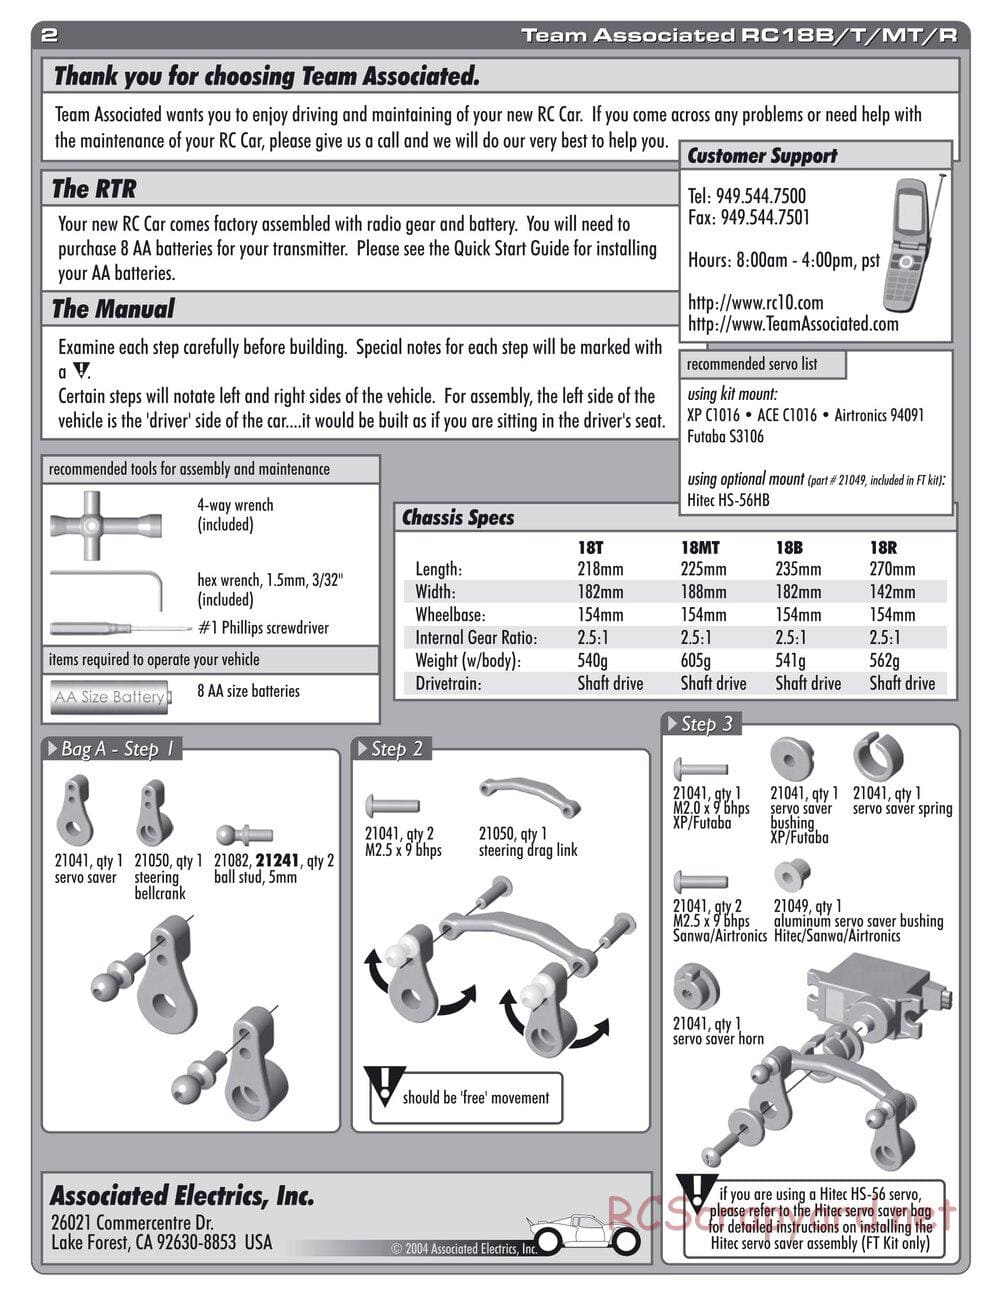 Team Associated - RC18 - Manual - Page 2